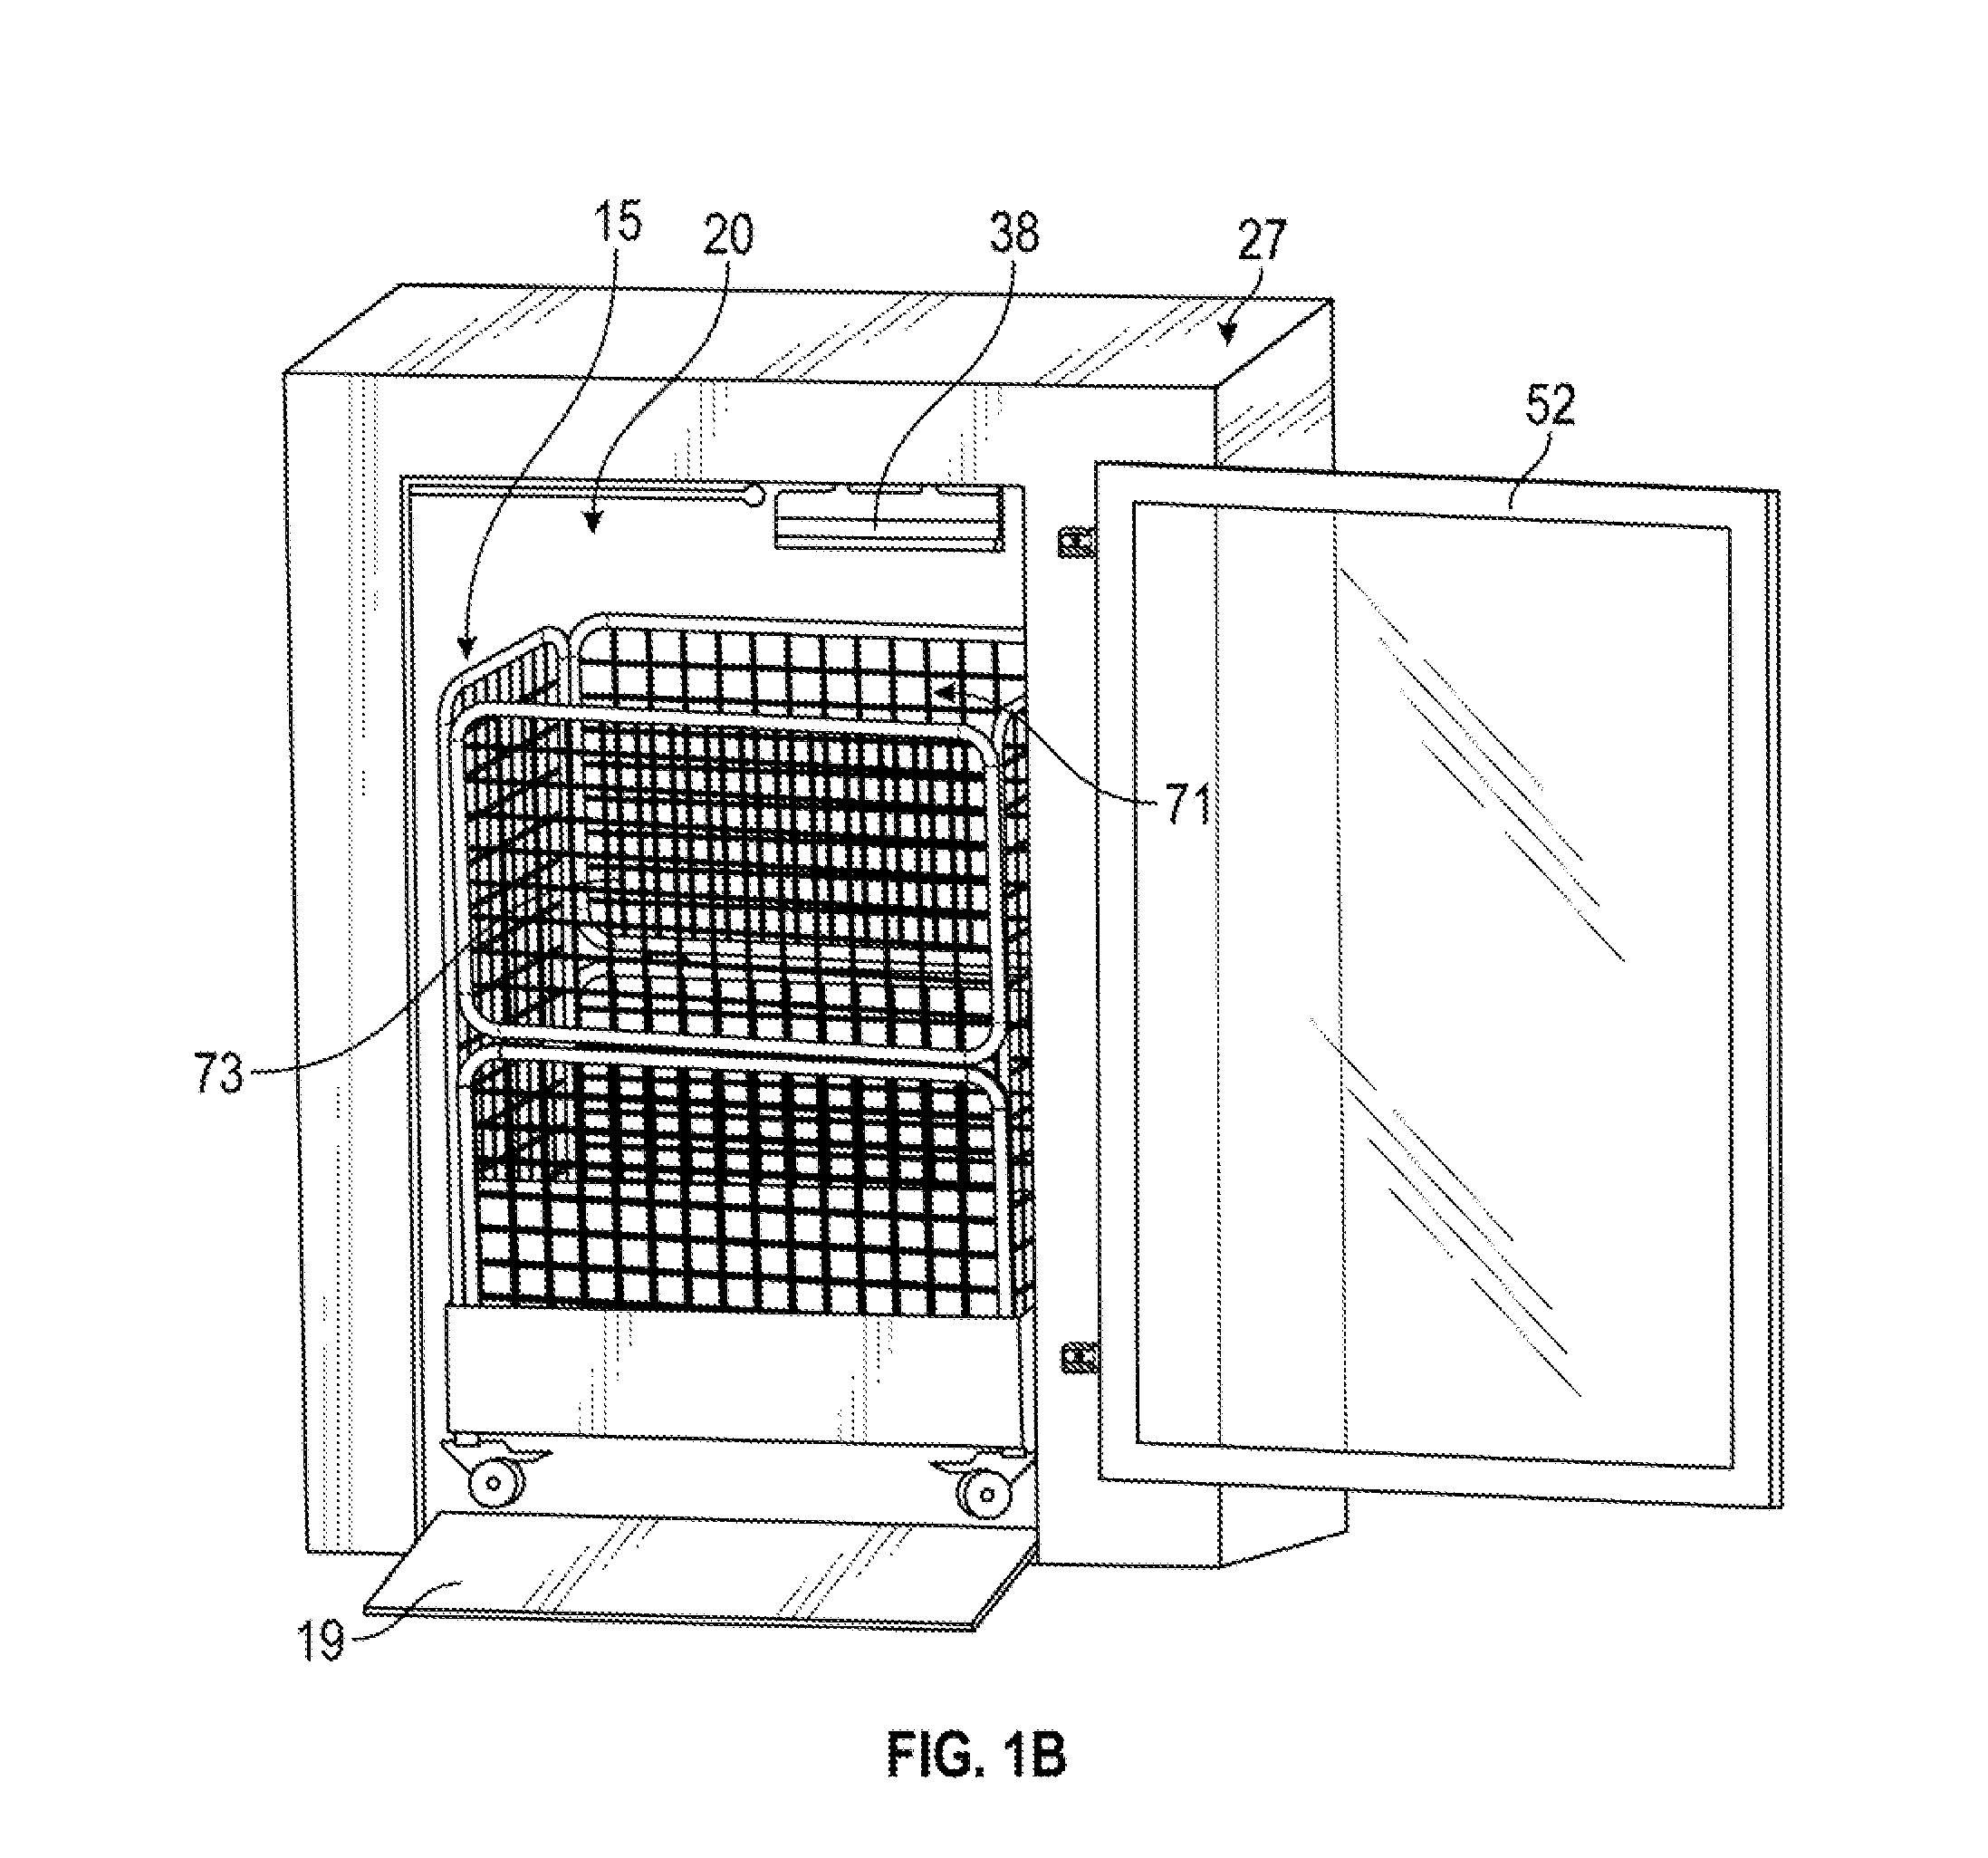 Method and Apparatus for Storing and Dispensing Bagged Ice